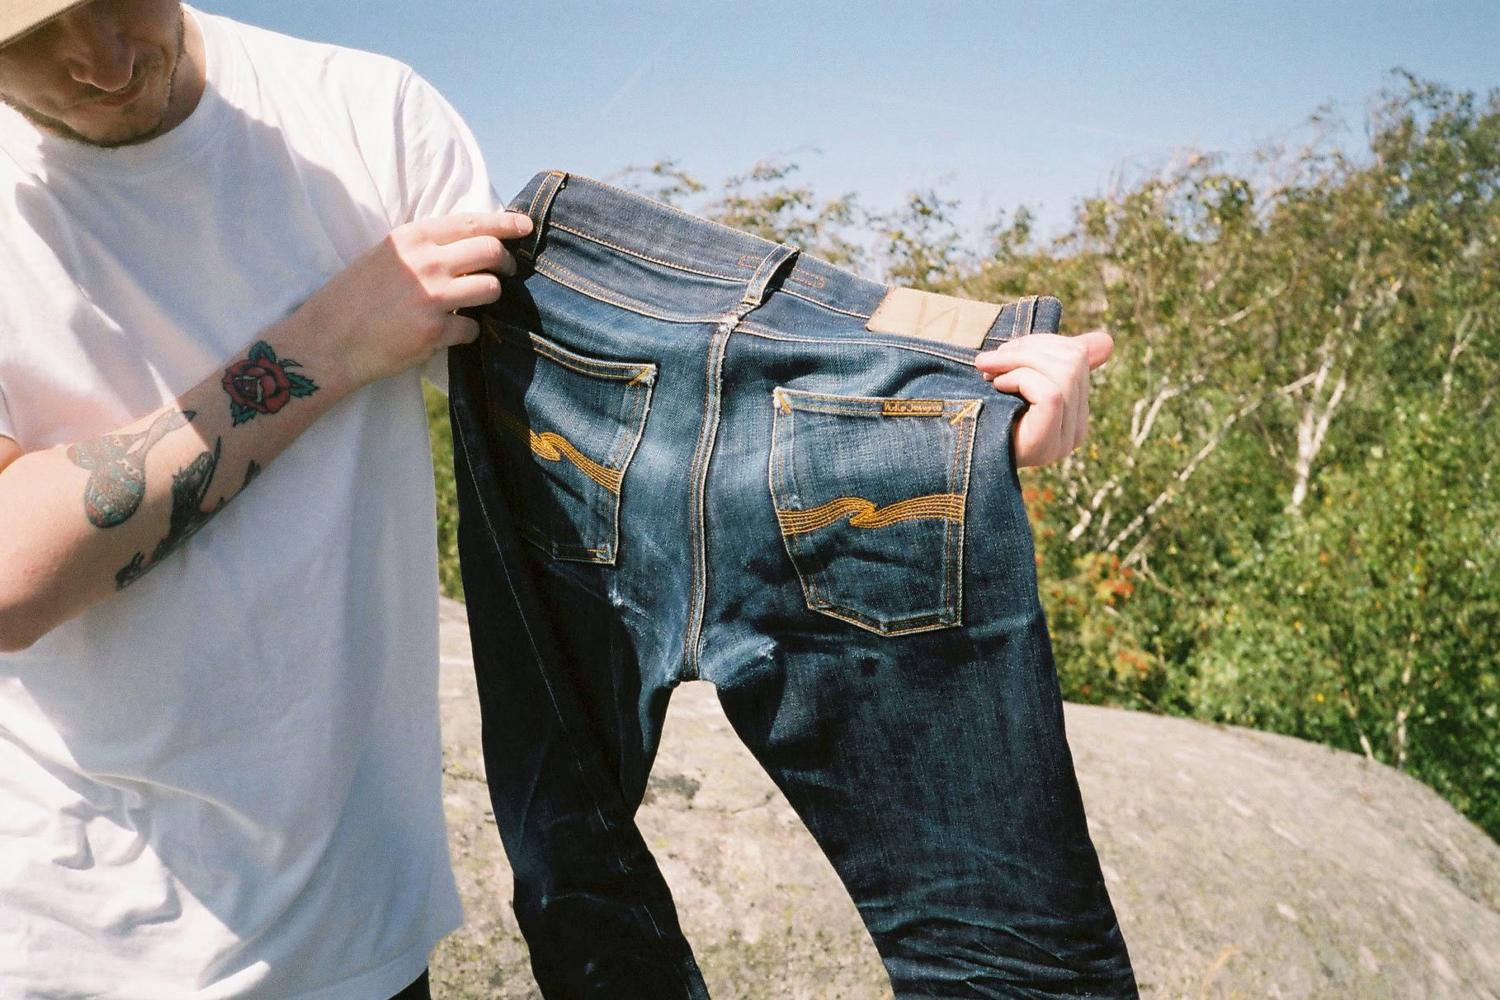 Nudie Jeans produces sustainable denim goods in 2022